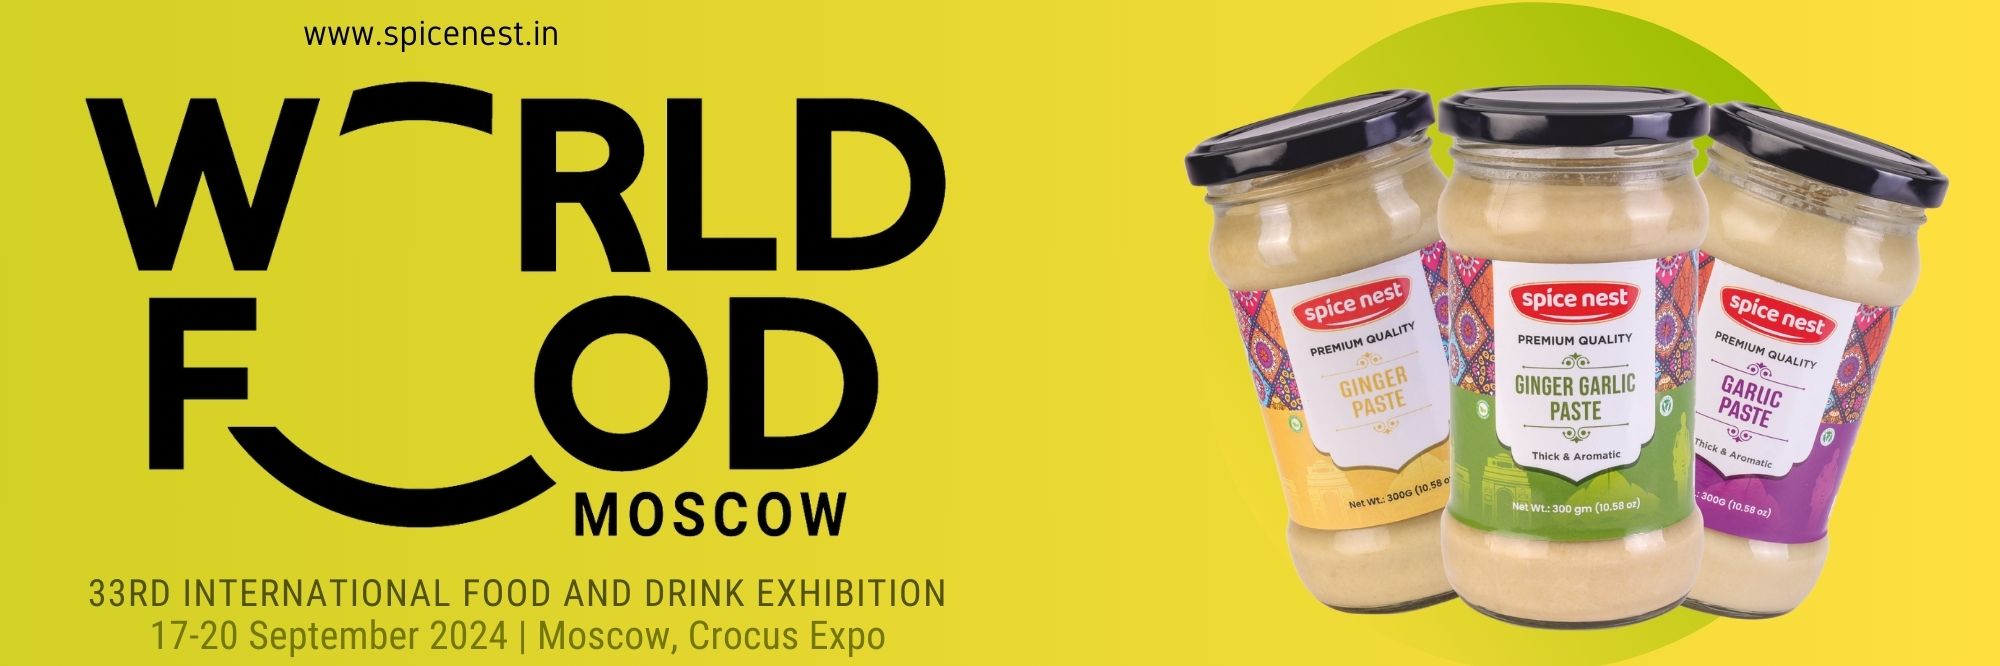 WorldFood Moscow 2024